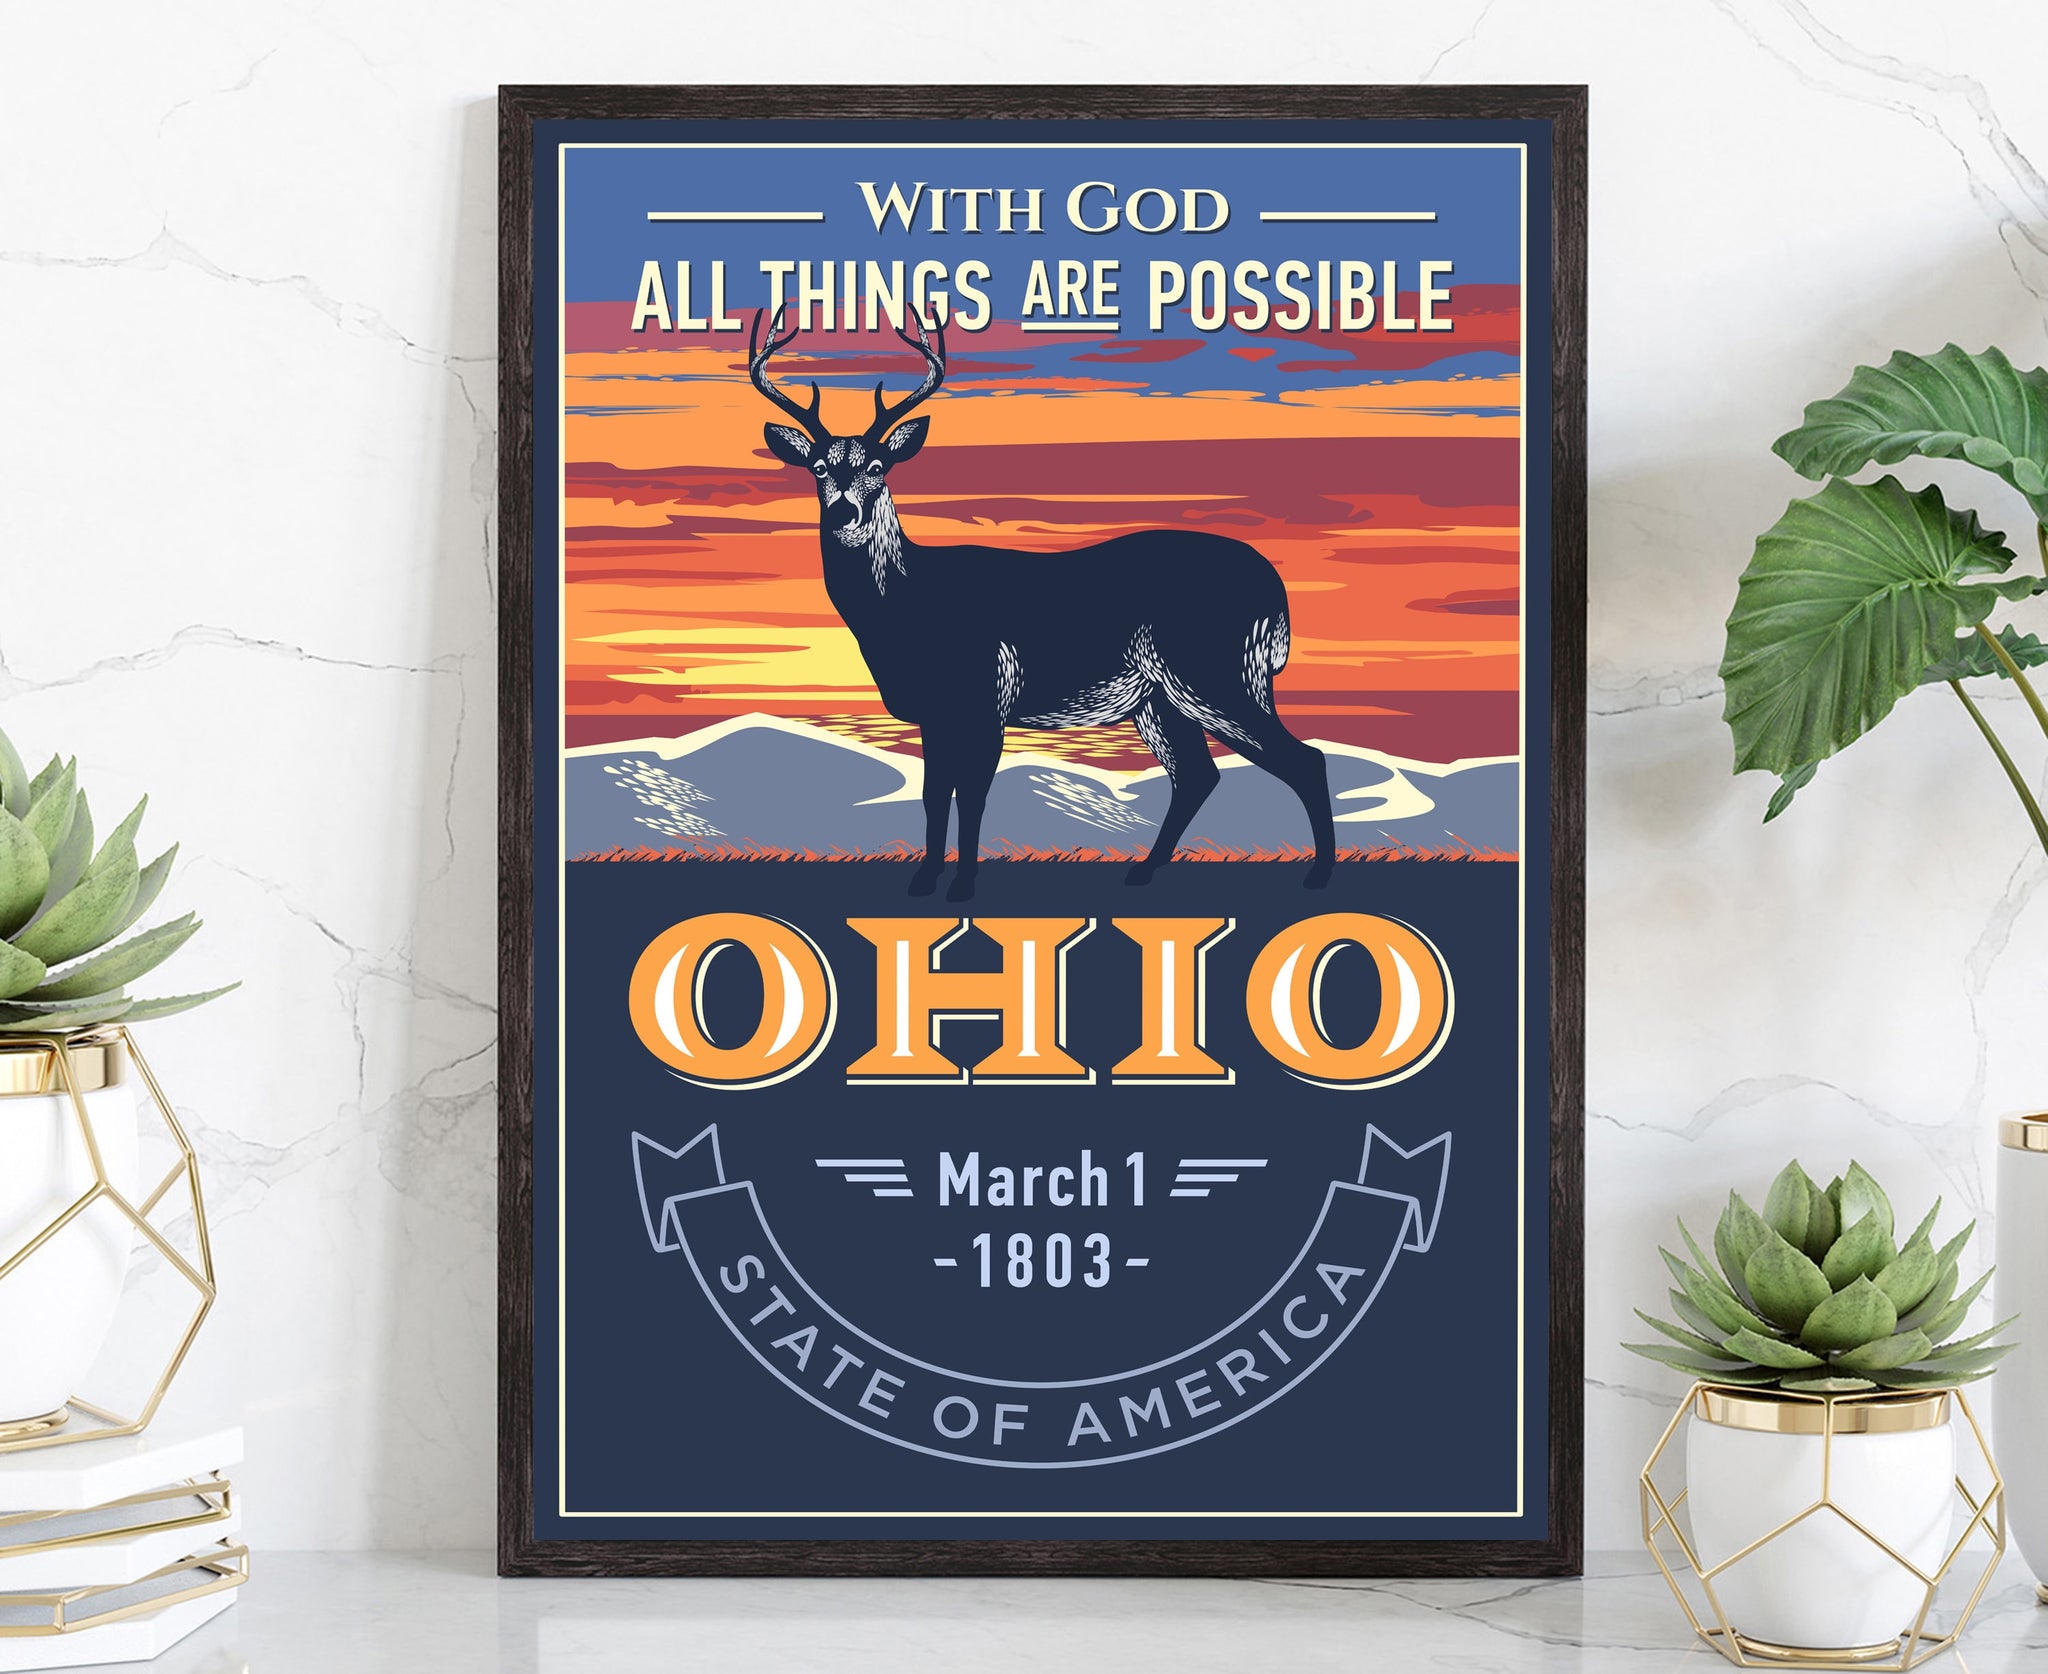 United States Poster, Ohio State Poster Print, Ohio State Emblem Poster, Retro Travel State Poster, Home Wall Art, Office Wall Art